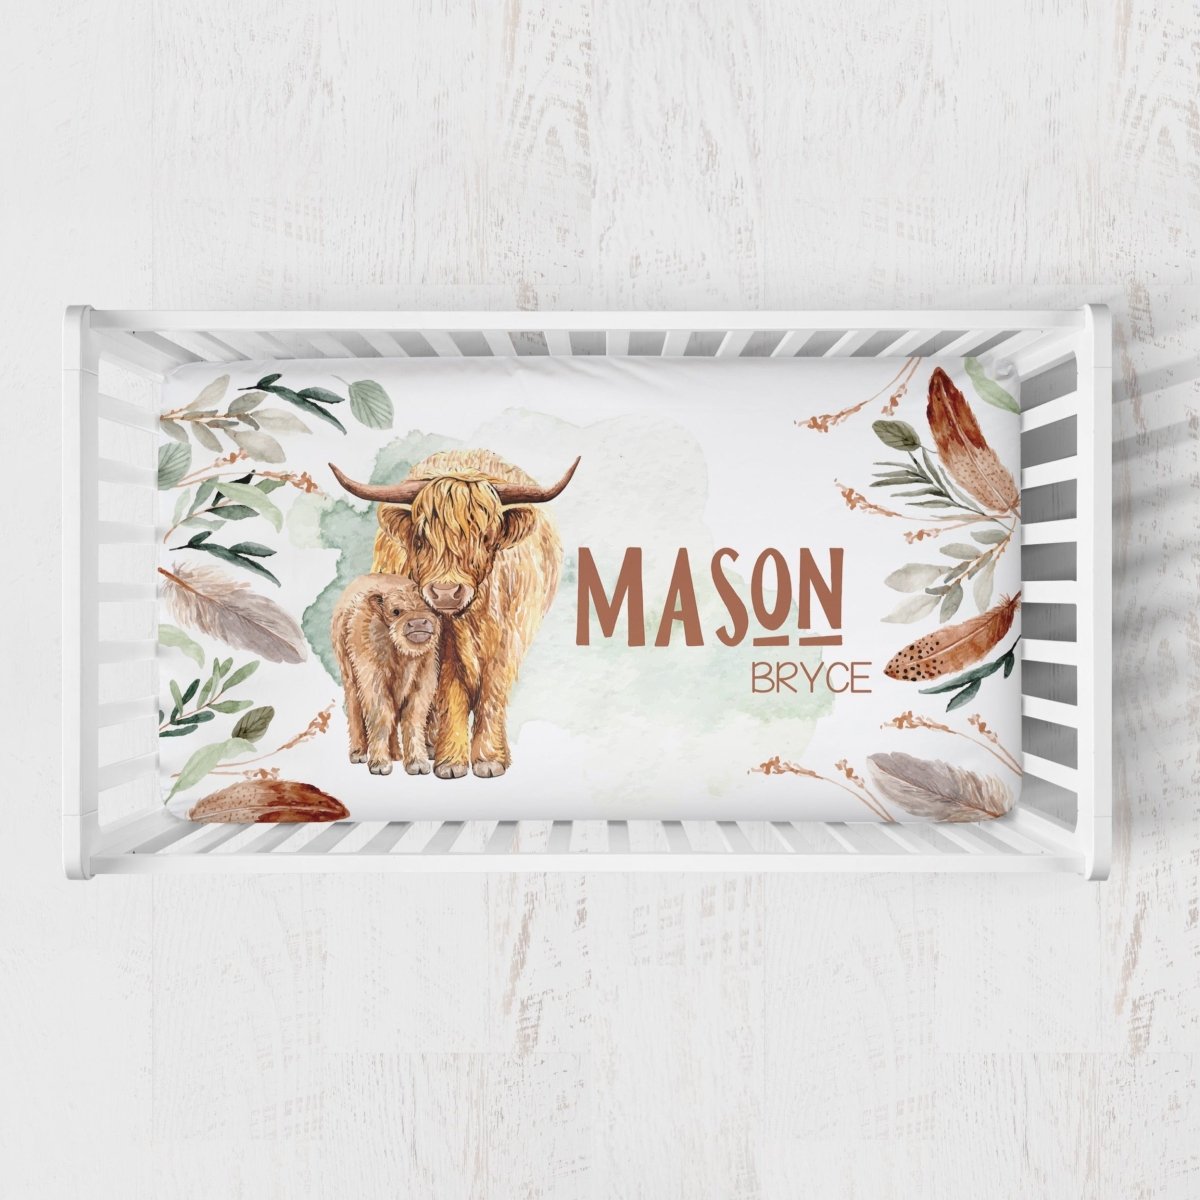 Highland Cow Feathers Personalized Crib Sheet - gender_boy, Personalized_Yes, text